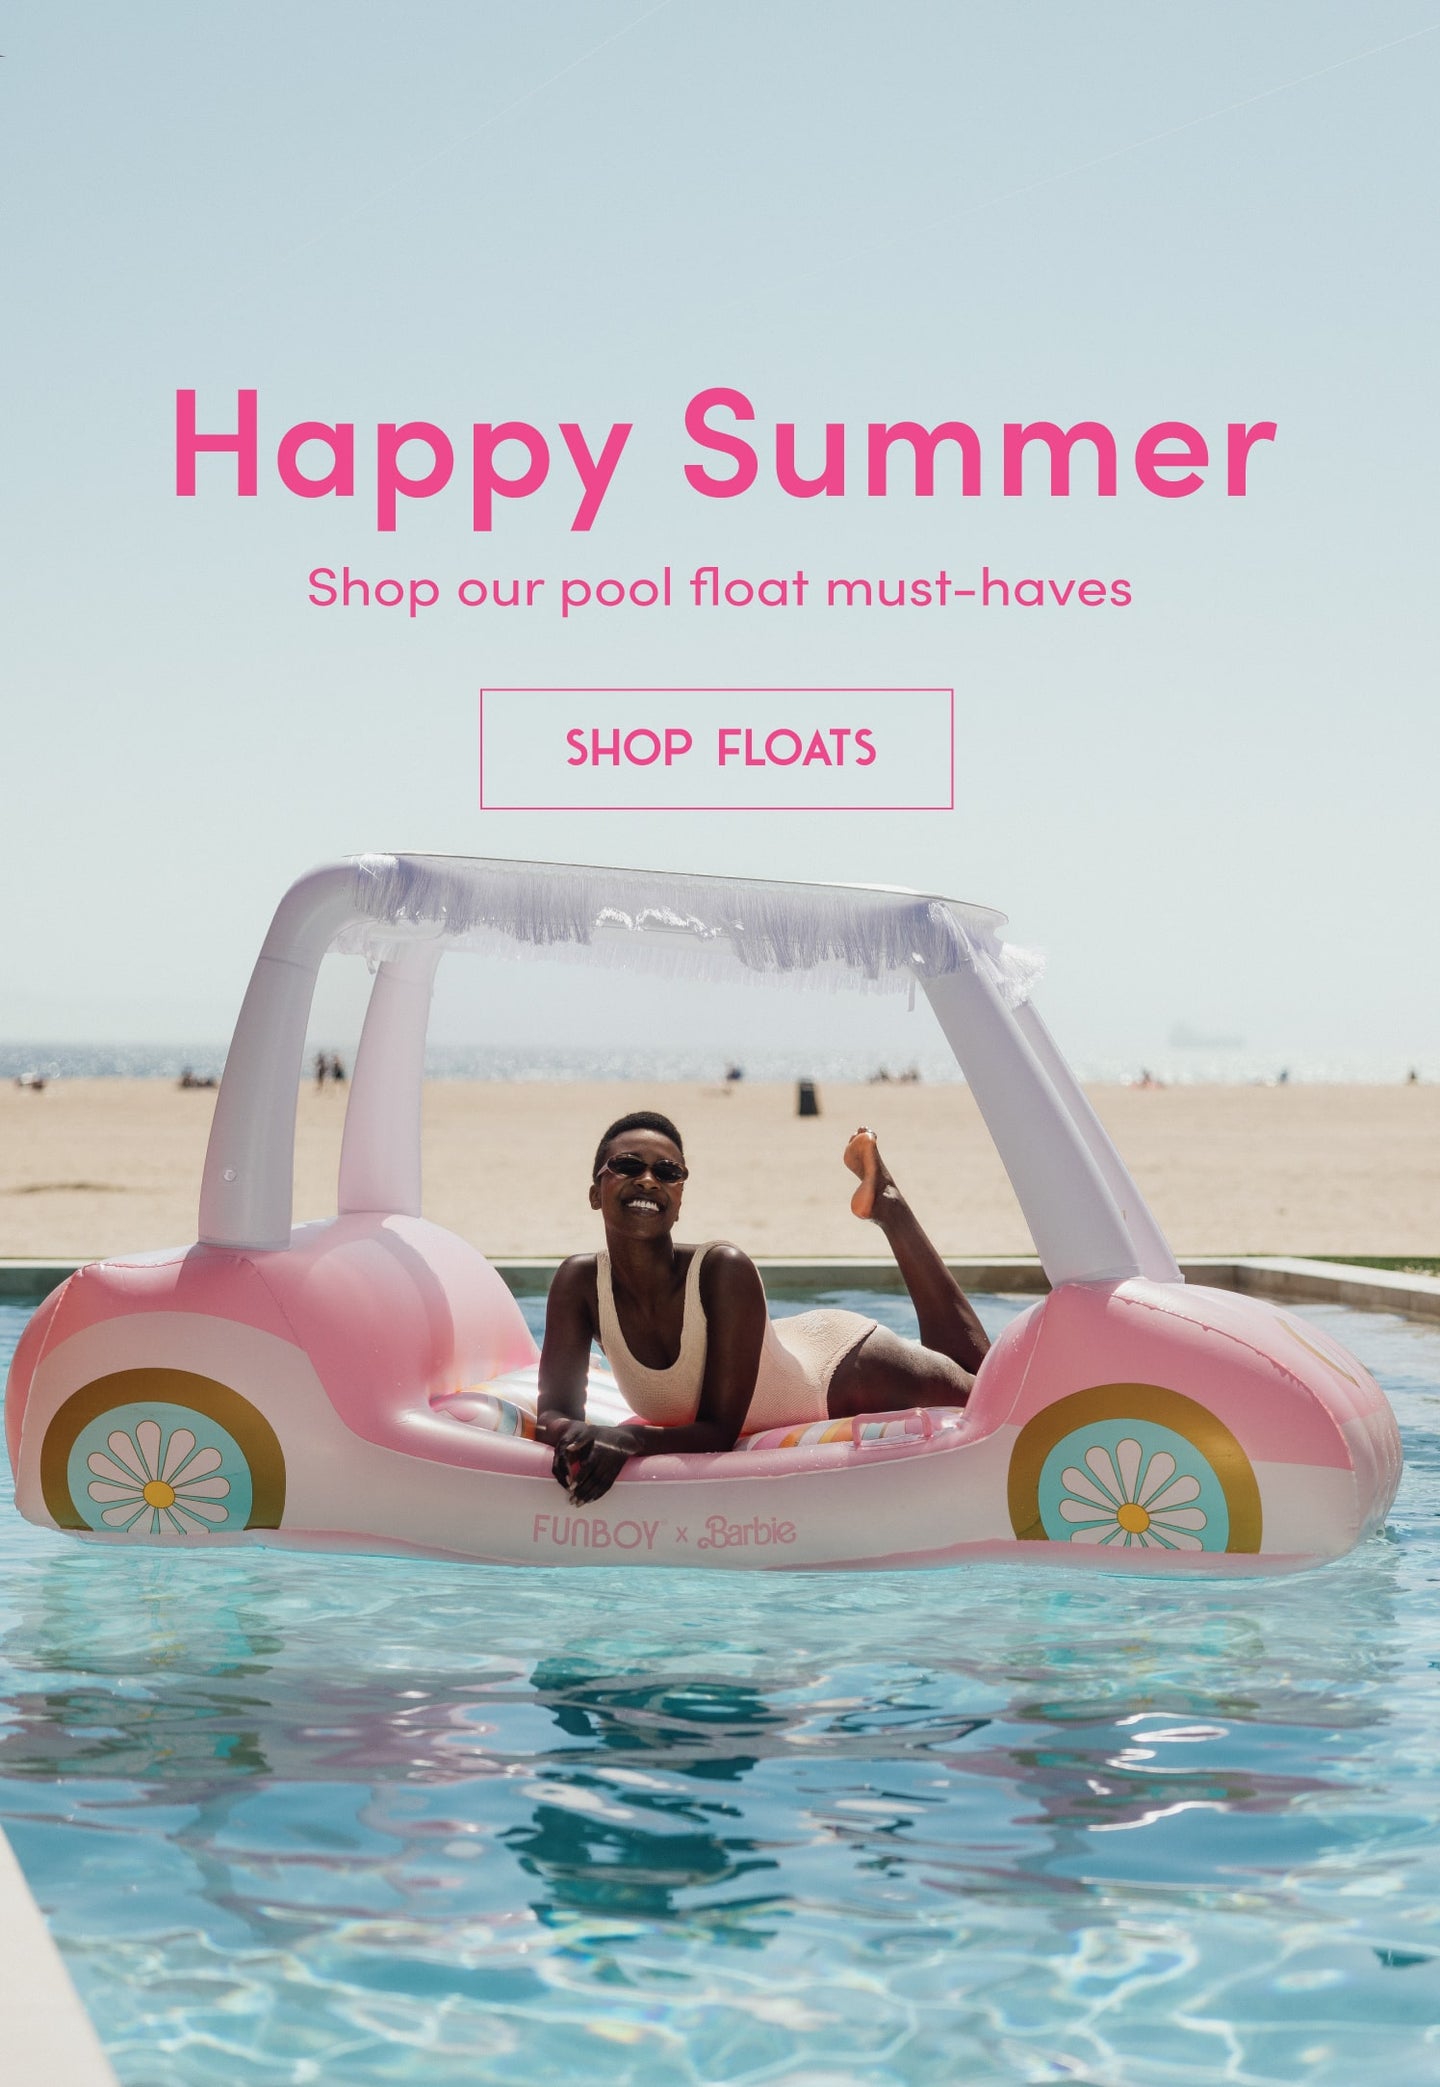 Happy Summer! Shop our pool float must-haves